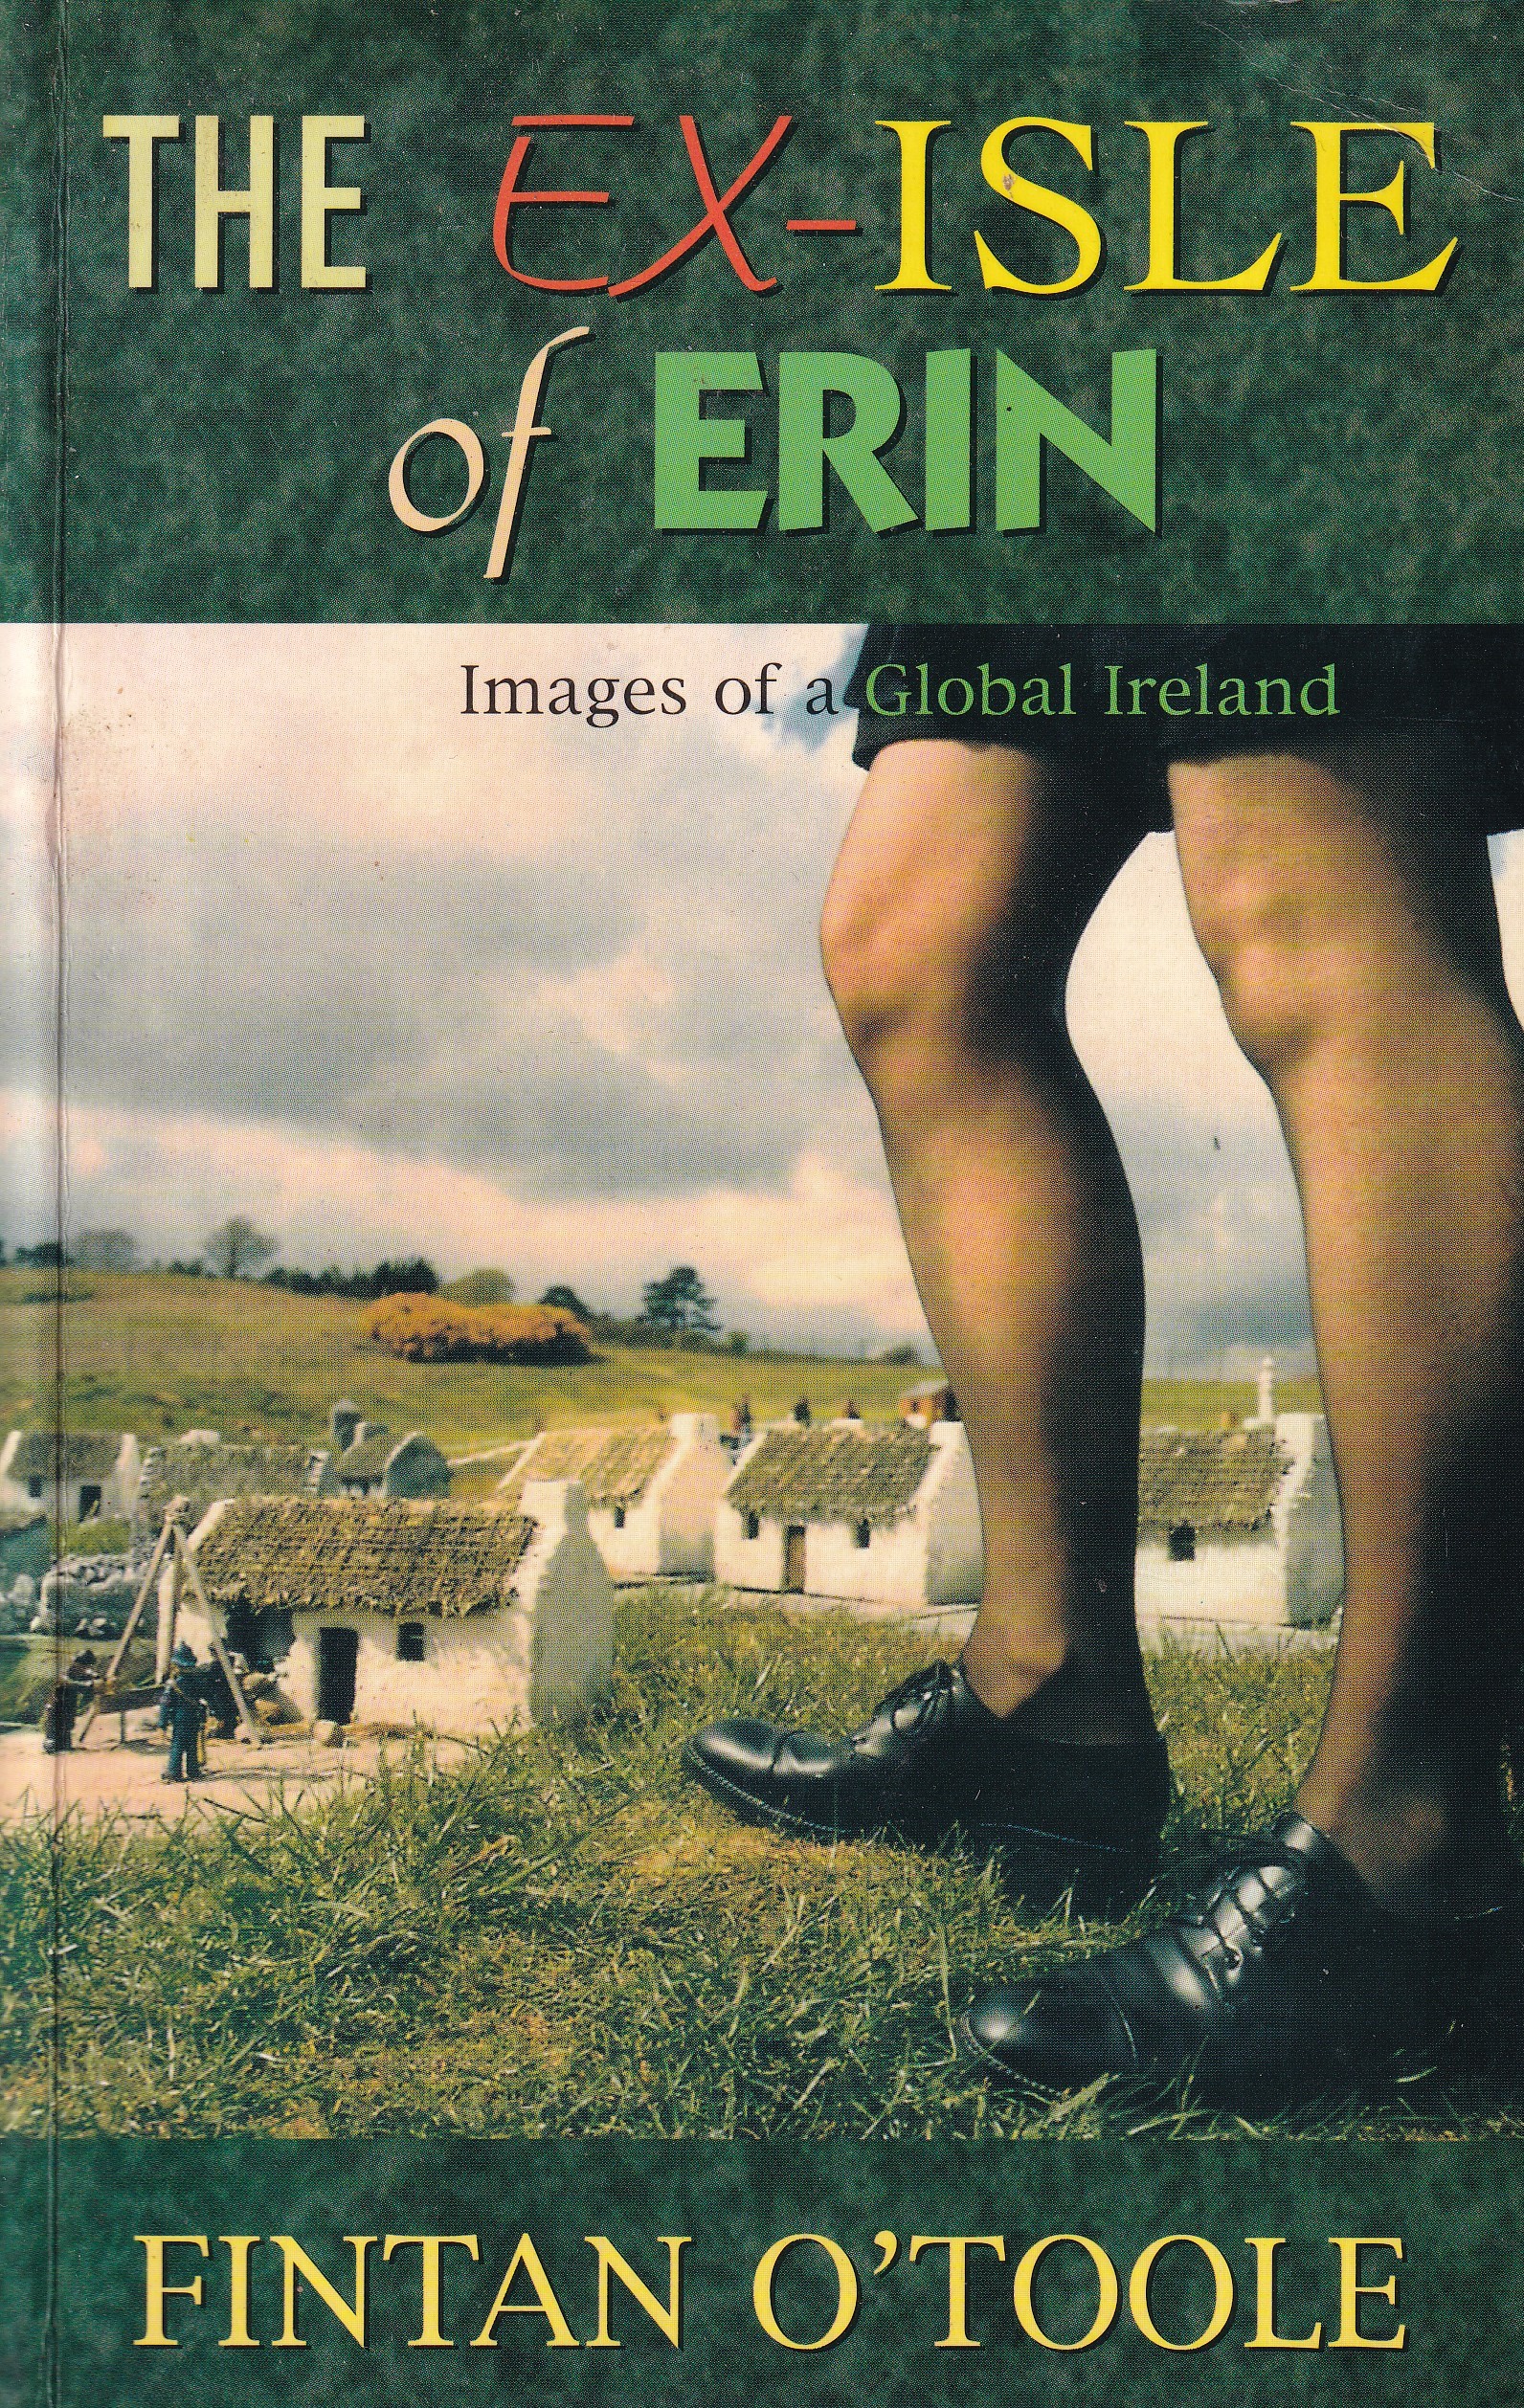 The Ex-Isle of Erin: Images of a Global Ireland | Fintan O'Toole | Charlie Byrne's